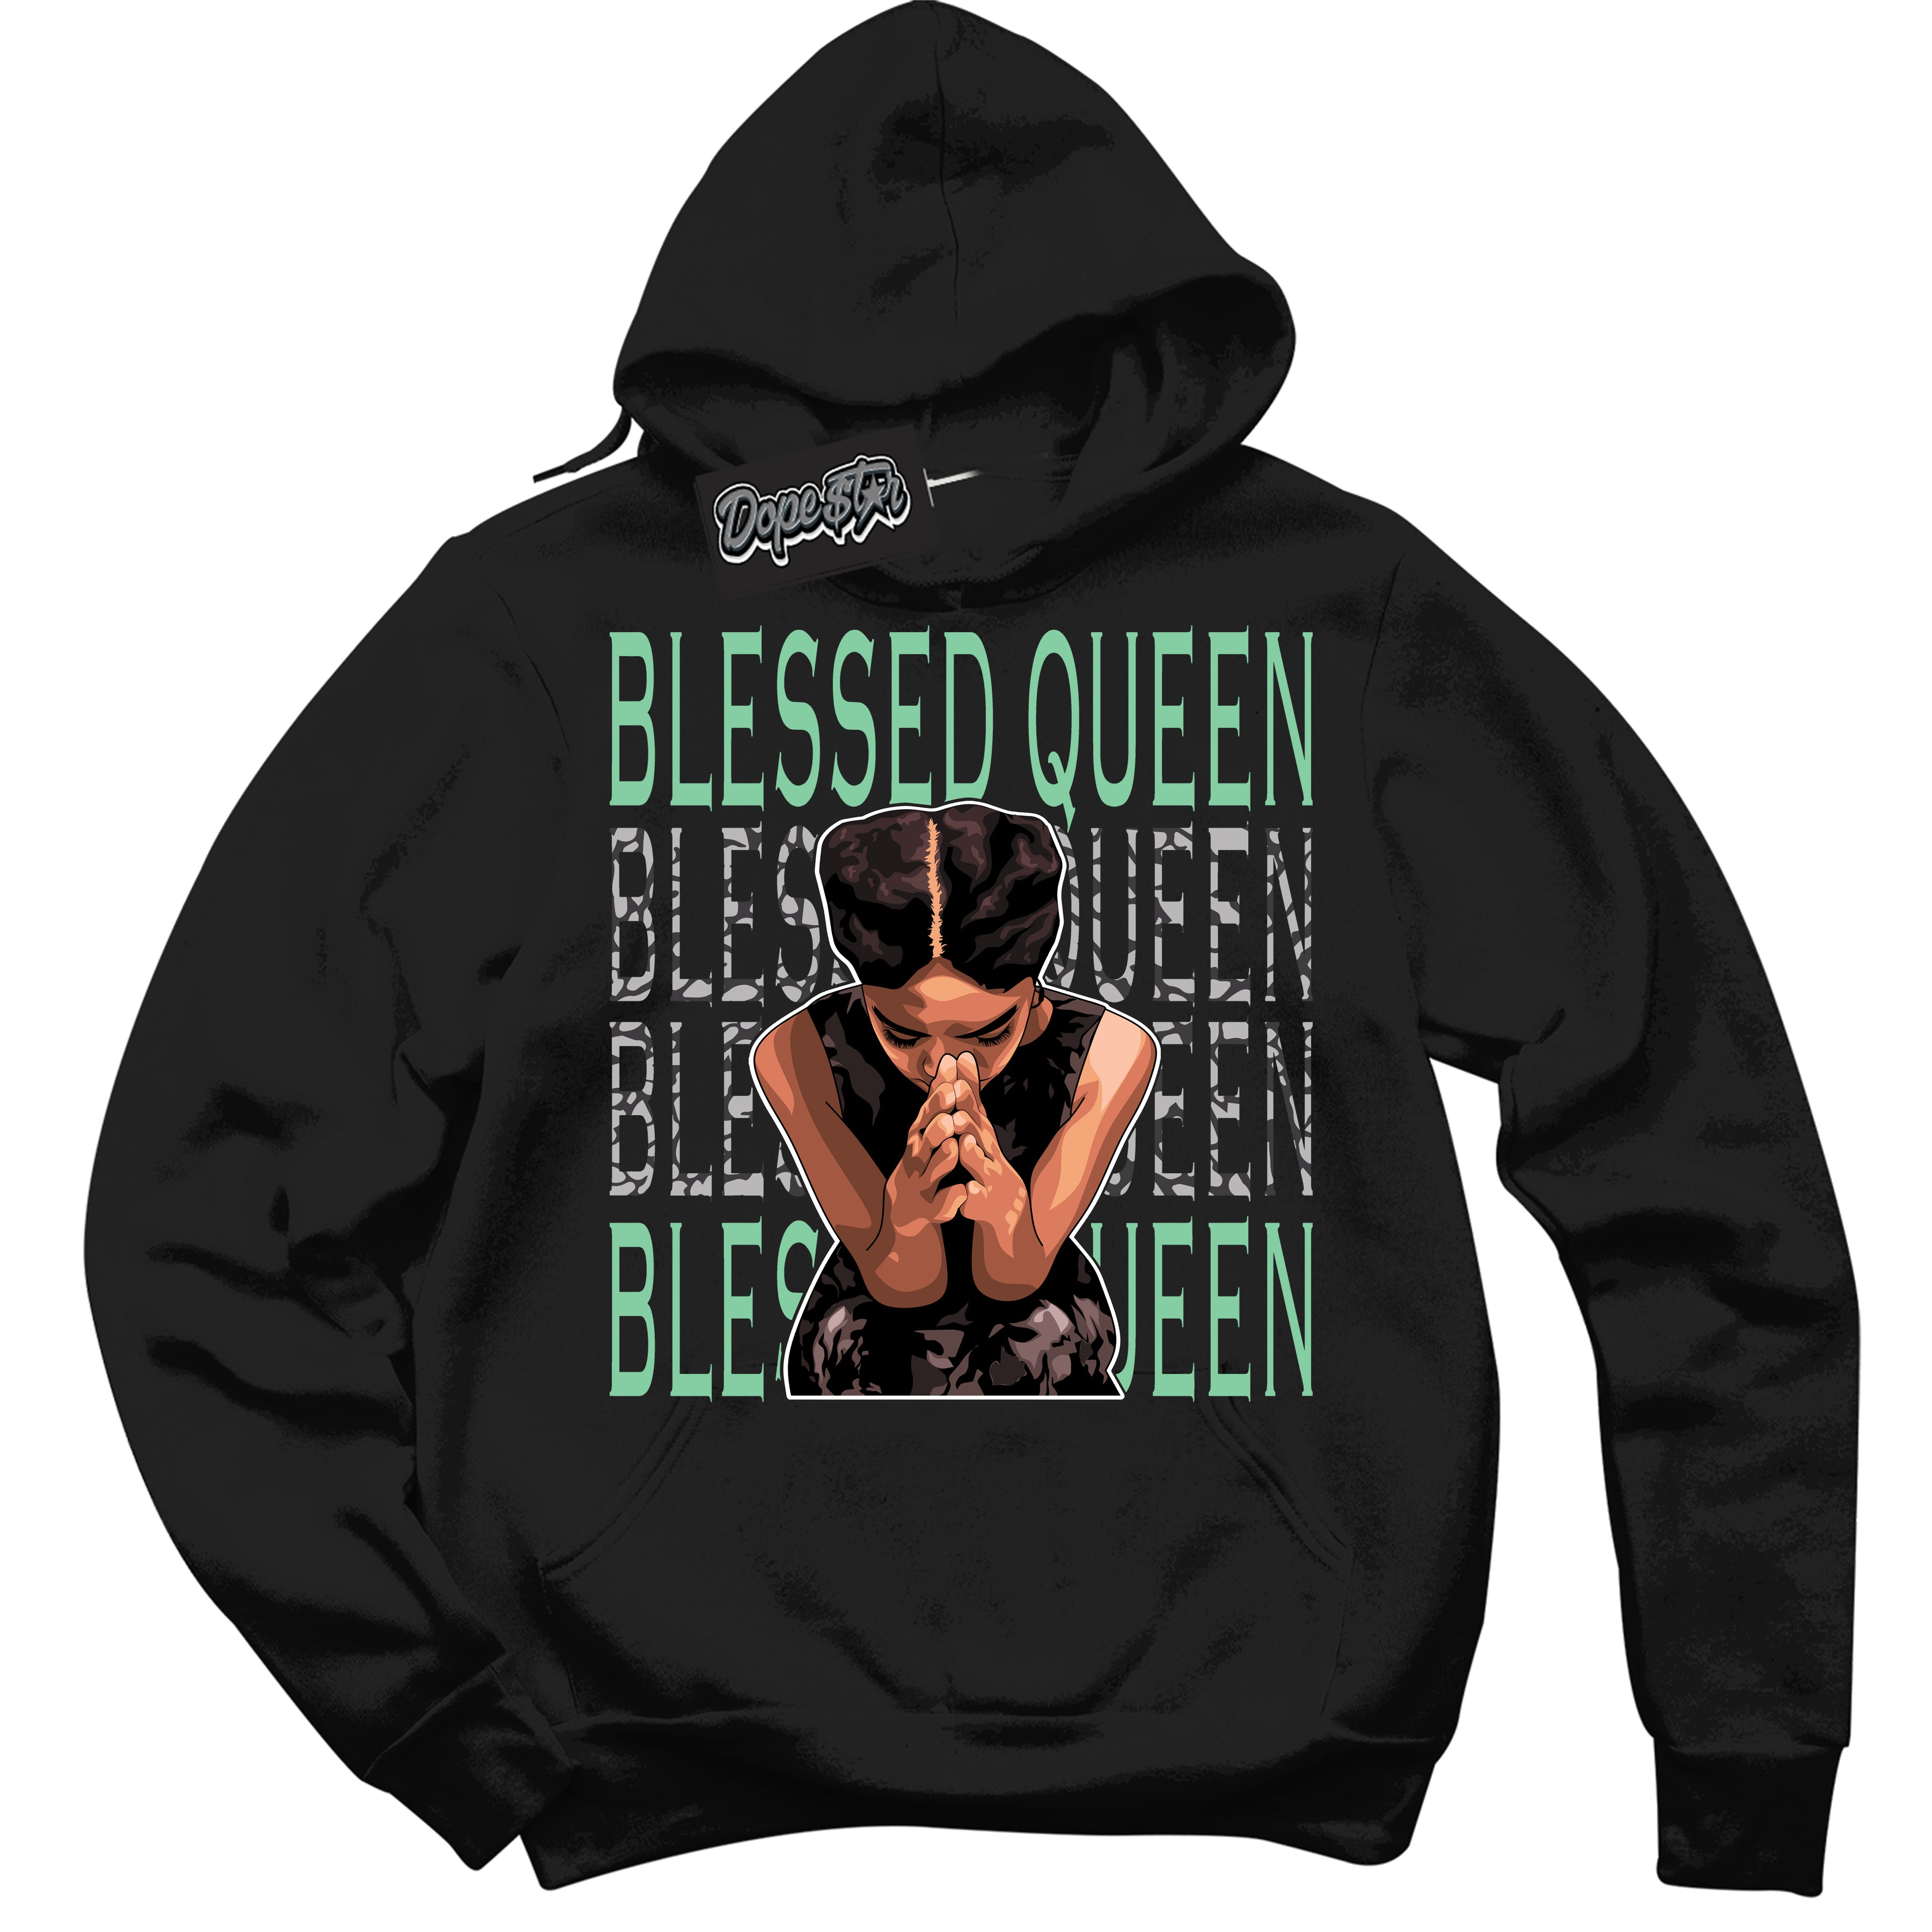 Cool Black Graphic DopeStar Hoodie with “ Blessed Queen “ print, that perfectly matches Green Glow 3S sneakers